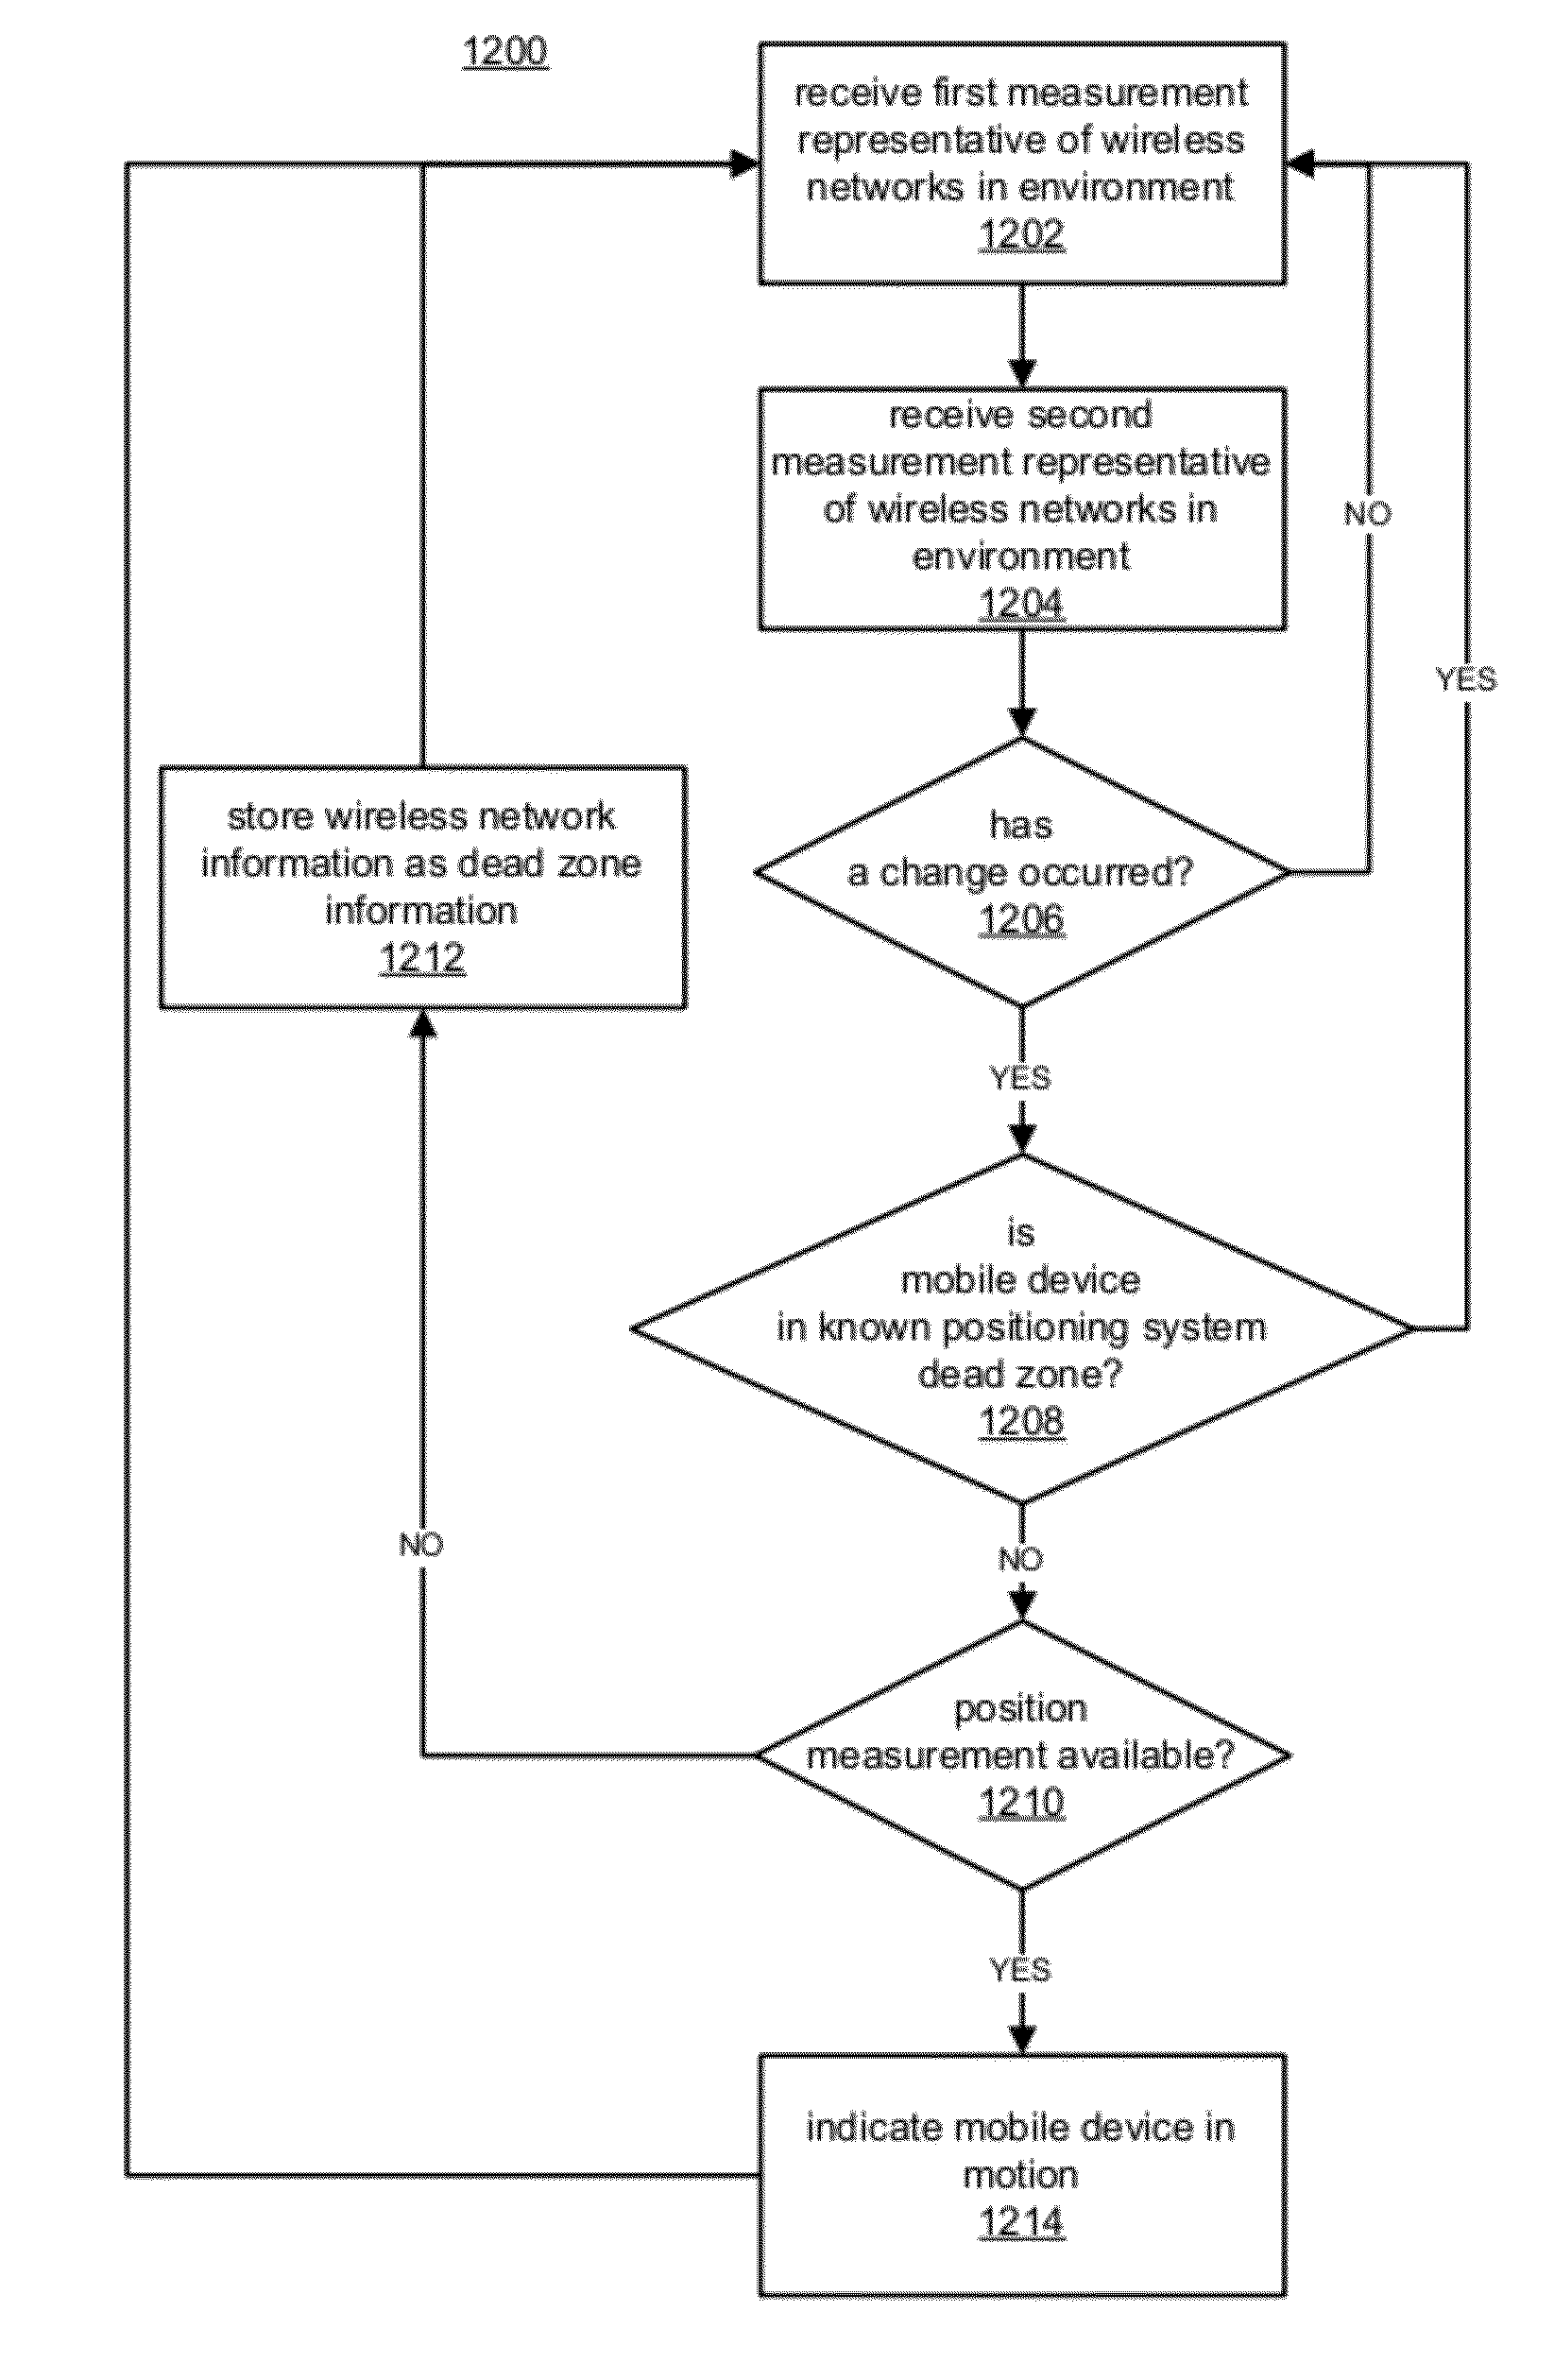 Systems and methods for selectively invoking positioning systems for mobile device control applications using multiple sensing modalities